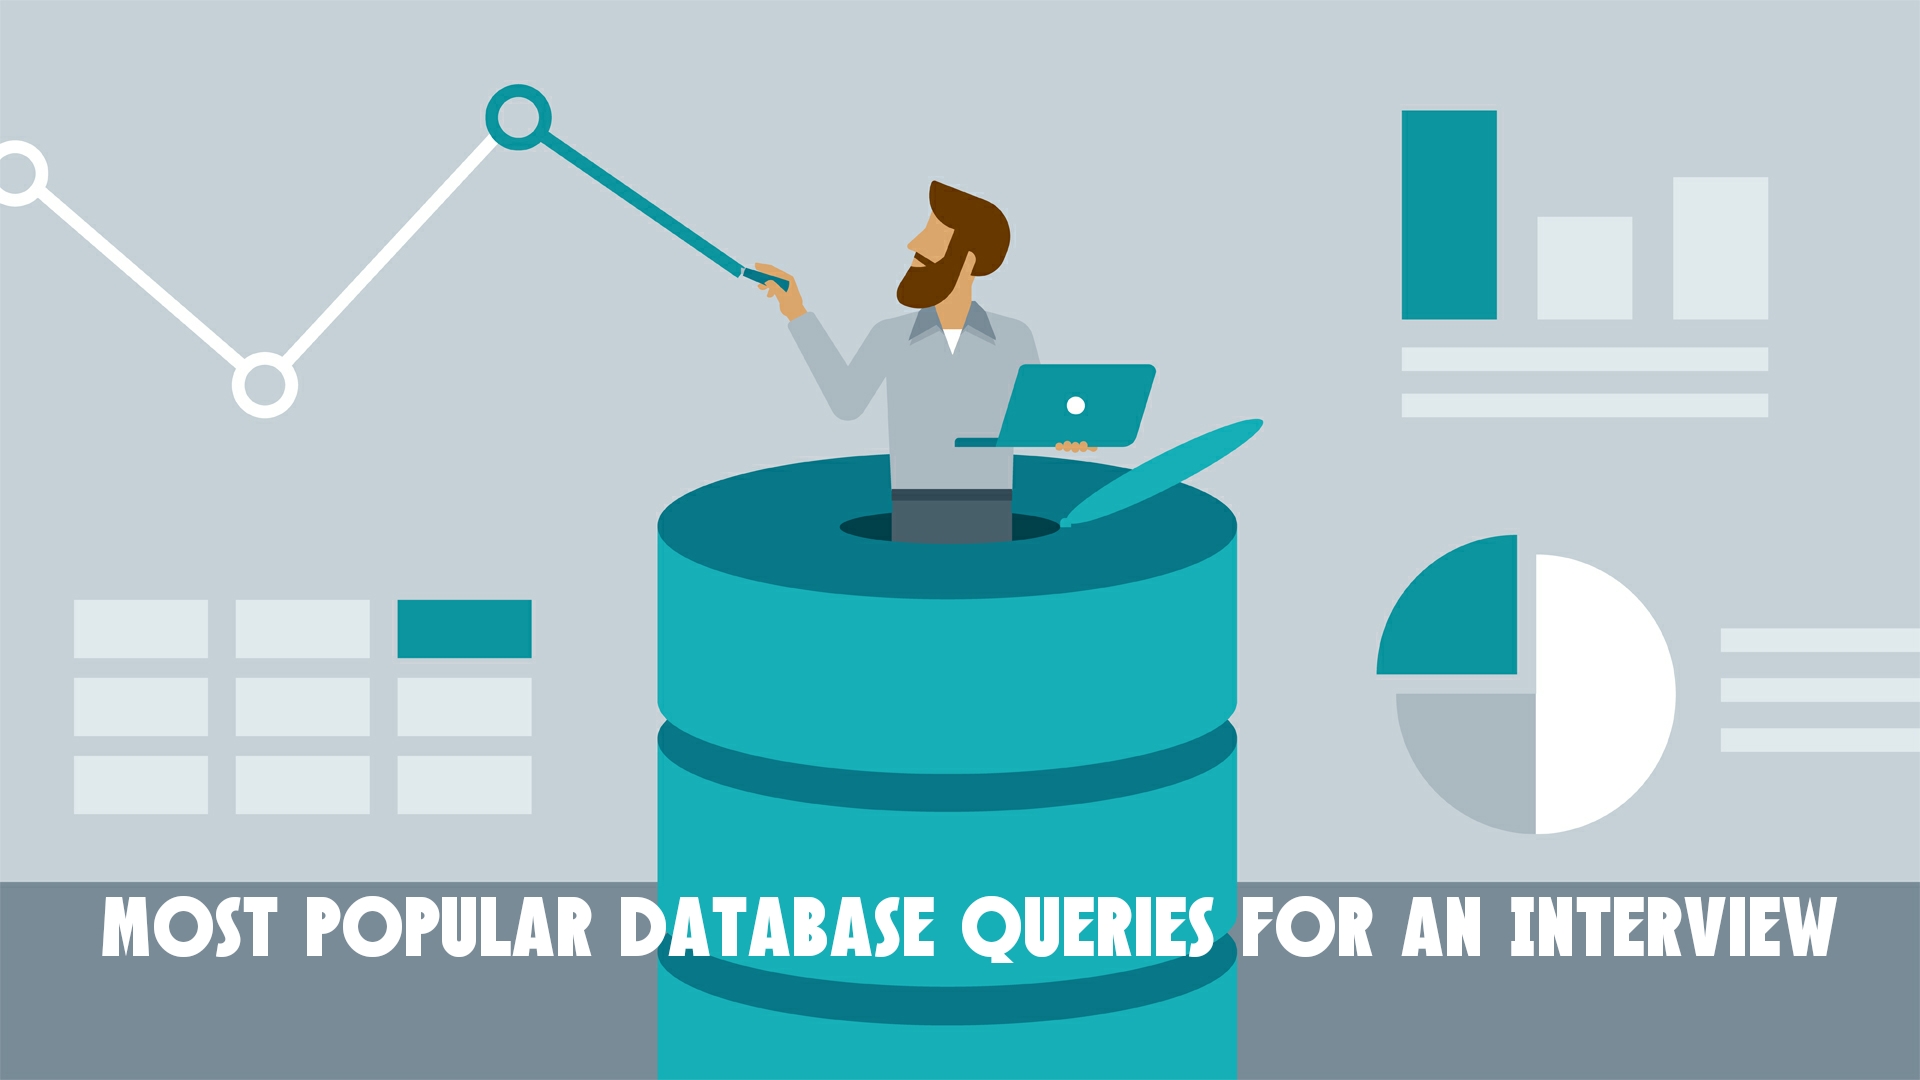 Most Popular Database Queries For an Interview